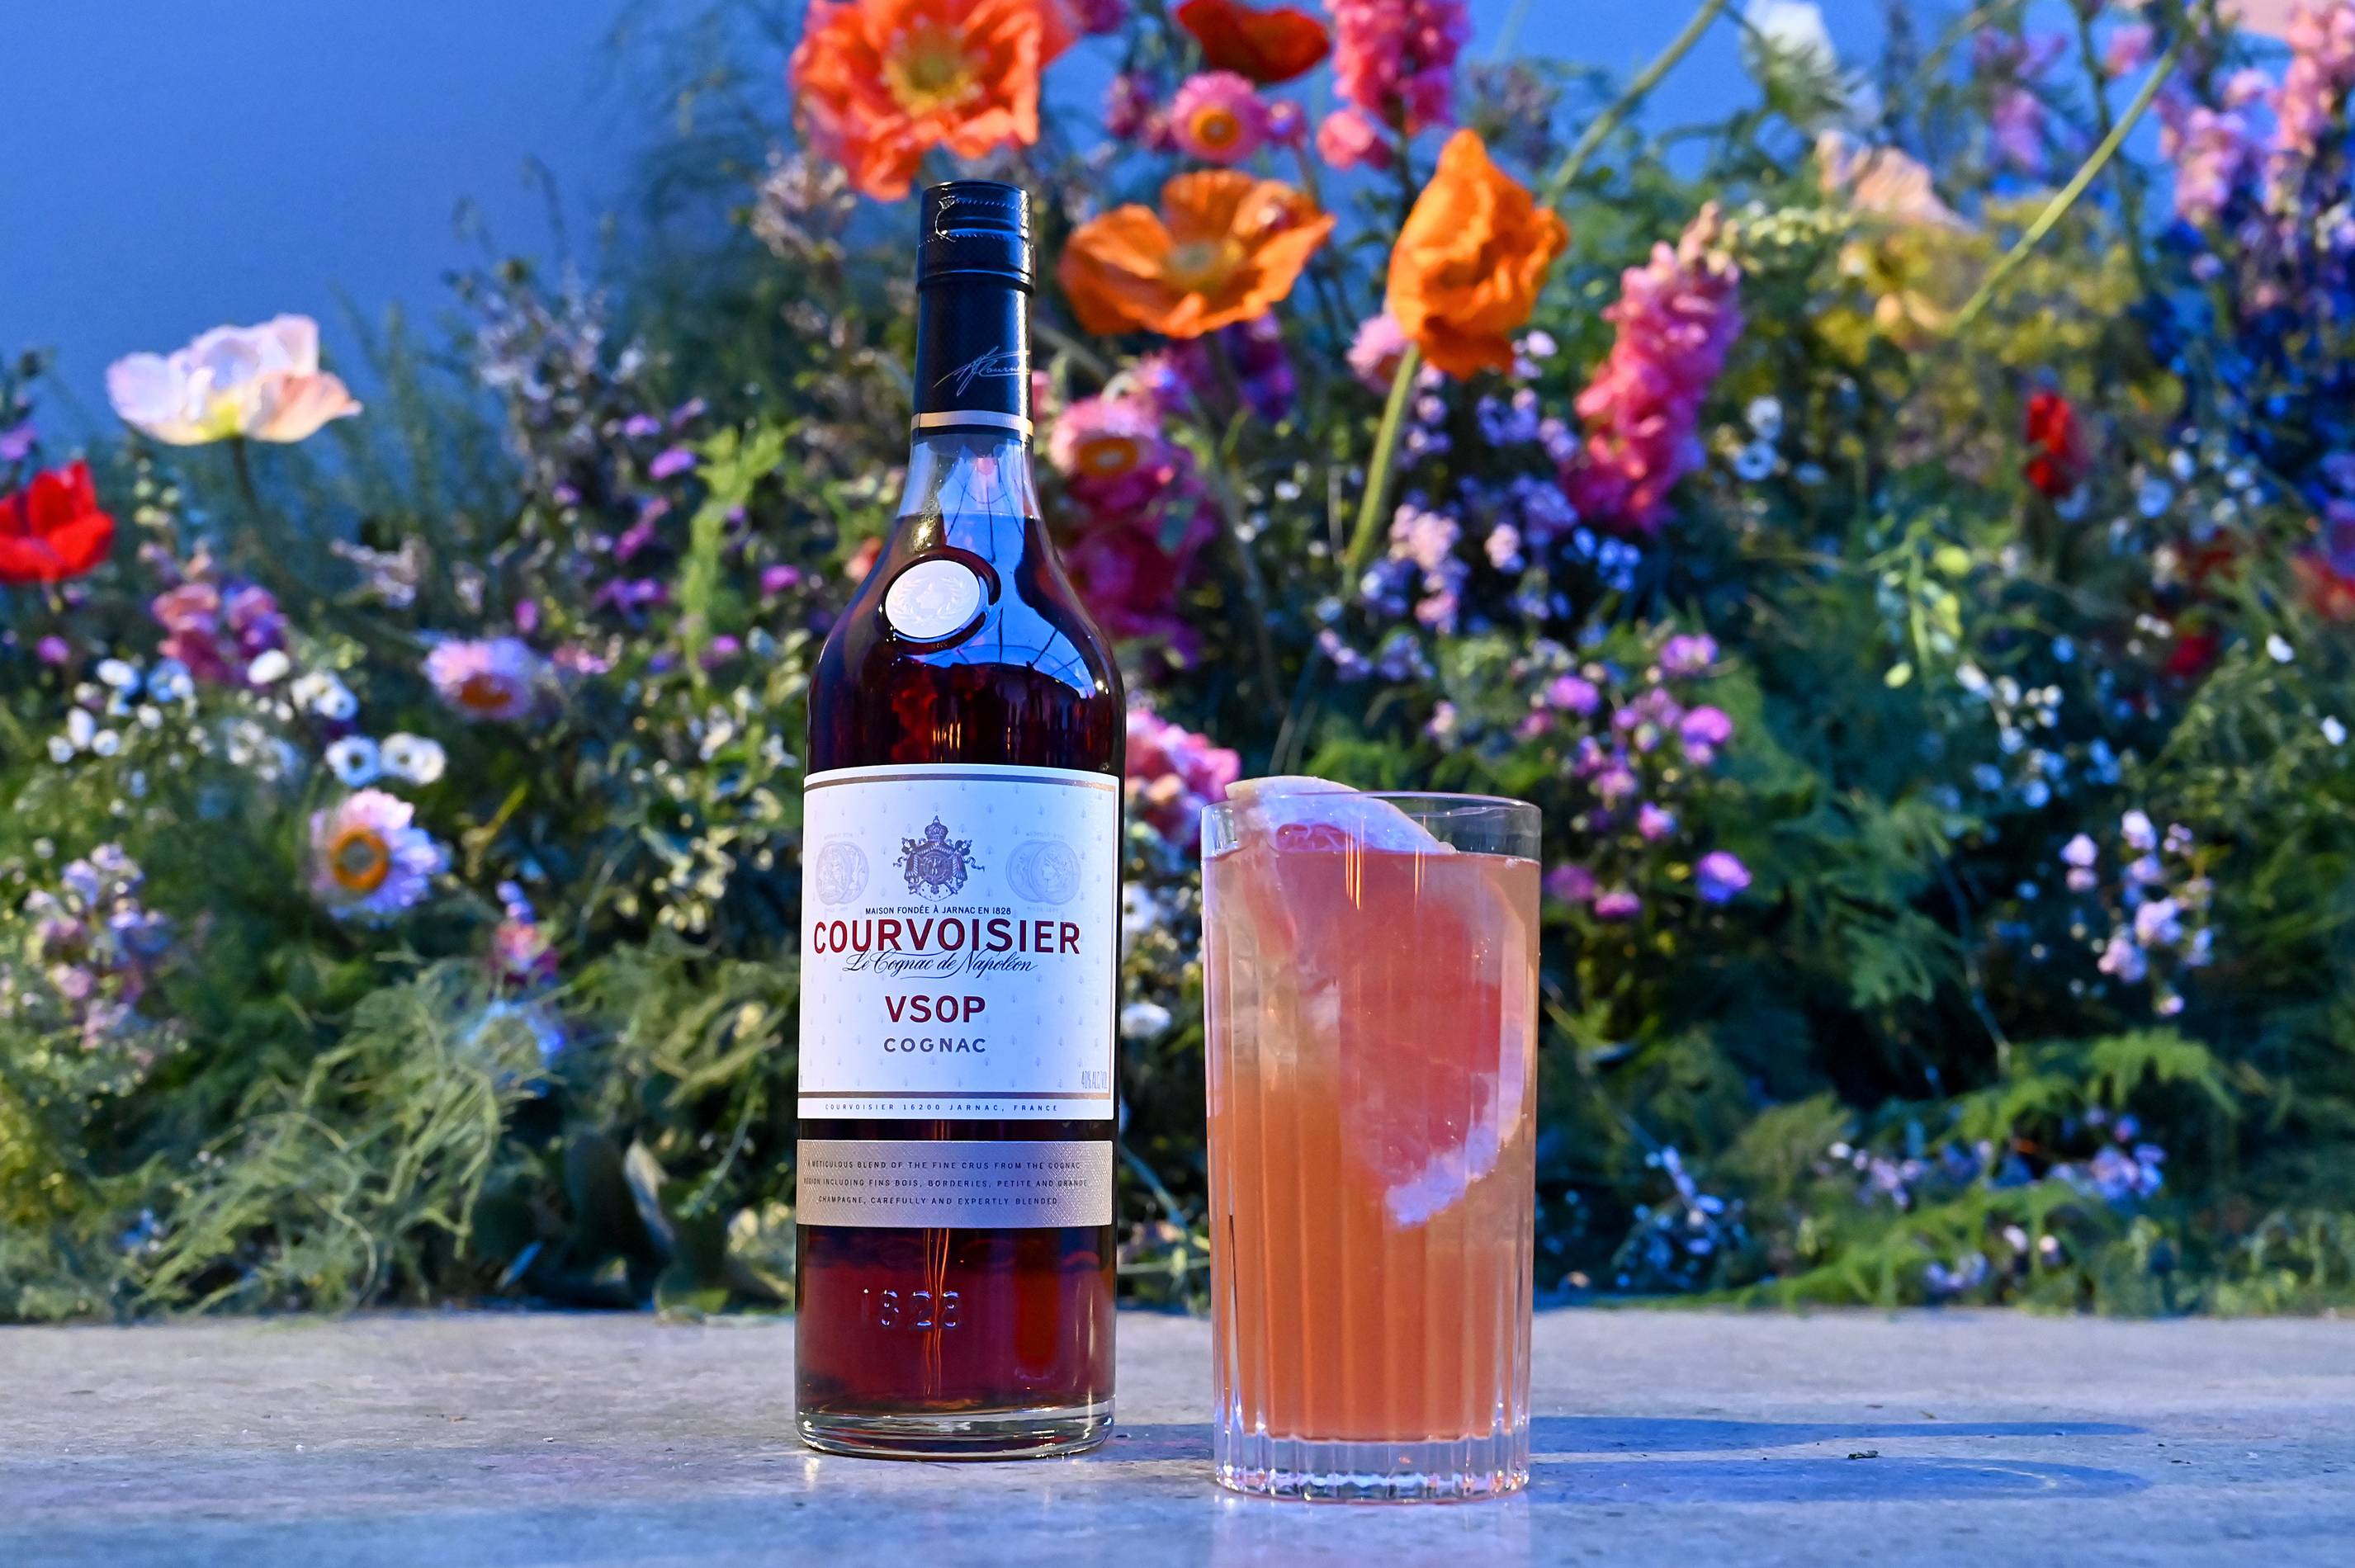 Courvoisier-cocktail-Photo-Credit-Astrid-Stawiarz-Getty-Images.jpg